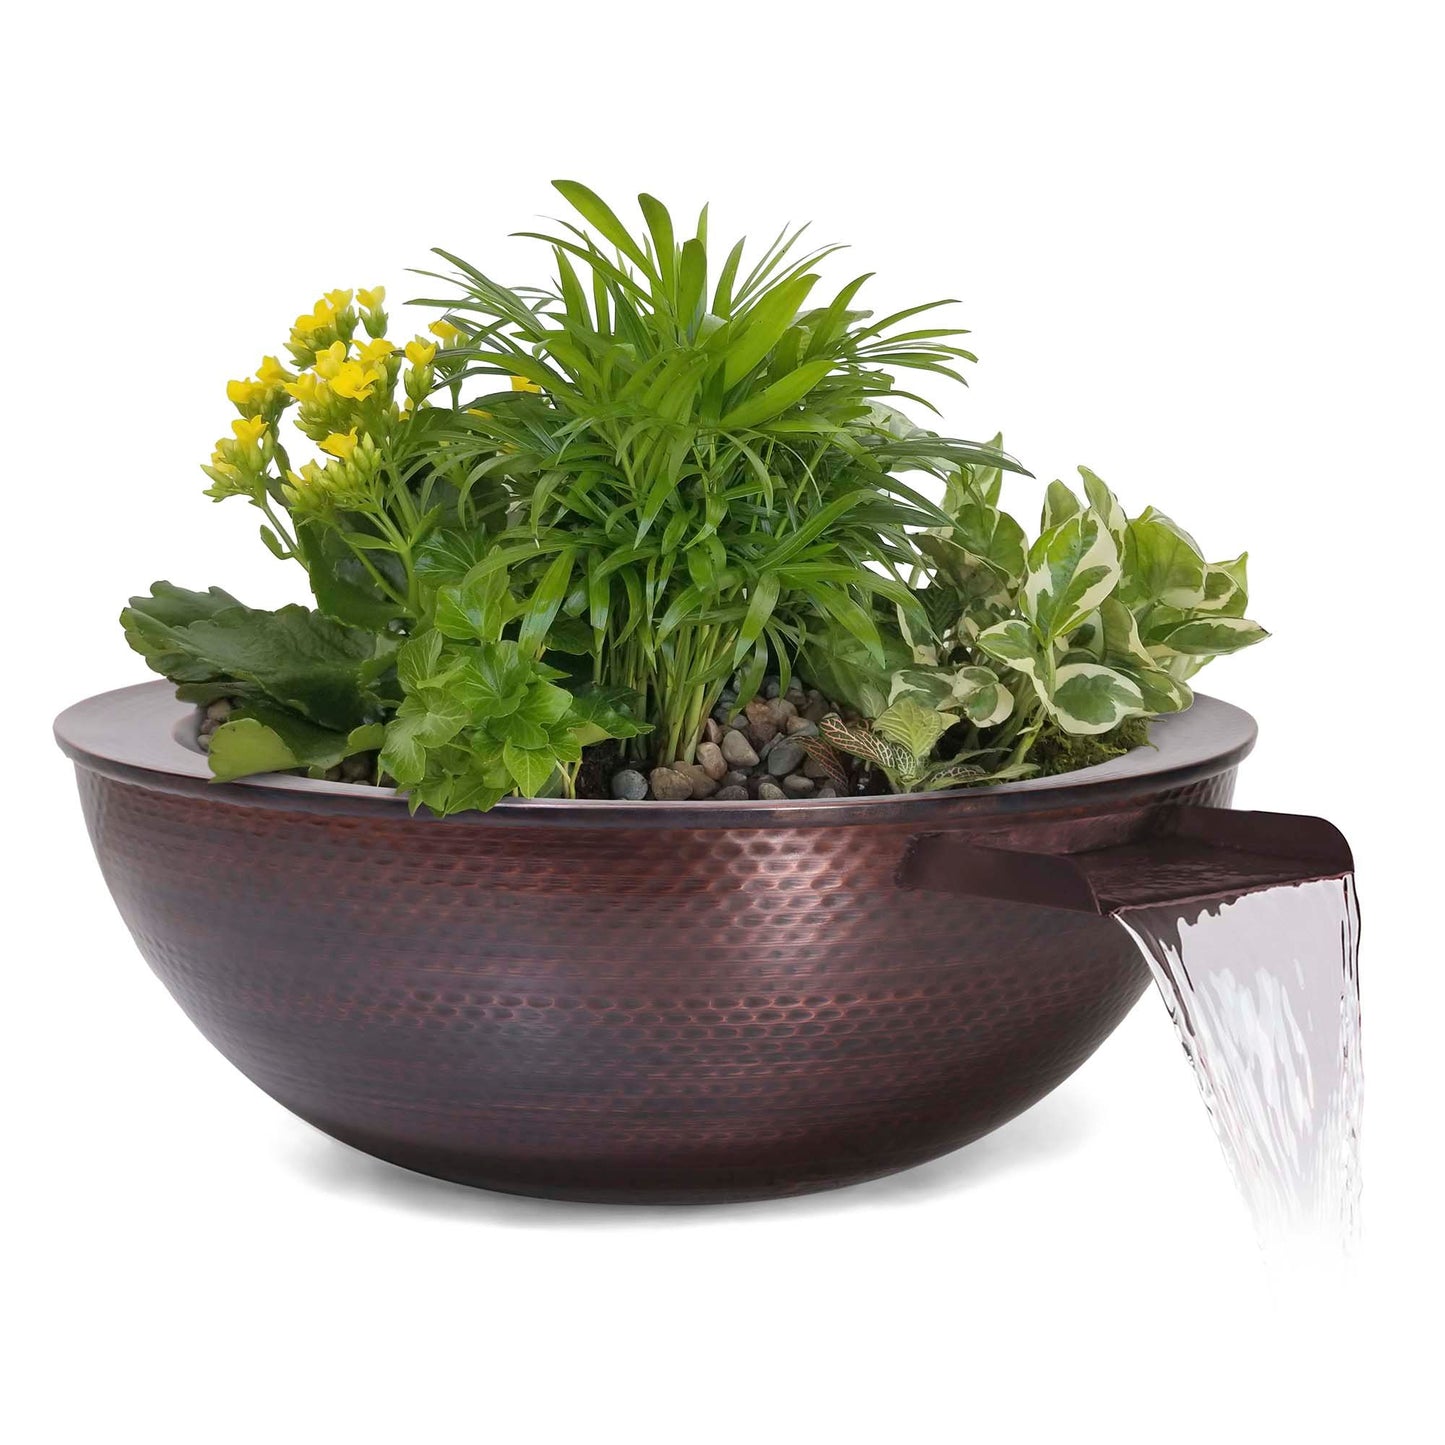 The Outdoor Plus Sedona Hammered Copper Planter & Water Bowl - OPT-RCPRPW freeshipping - Luxury Tech Inc.